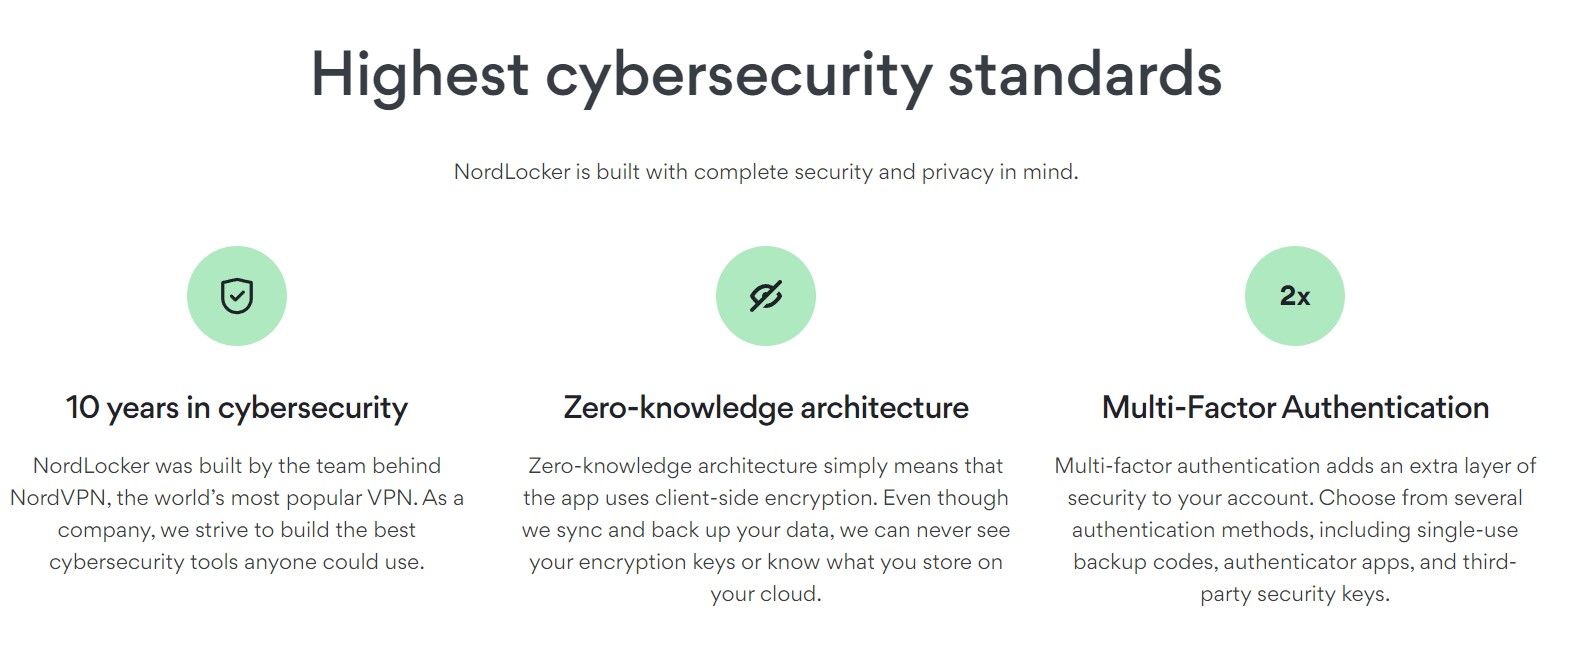 Nordlocker offers complete security and privacy